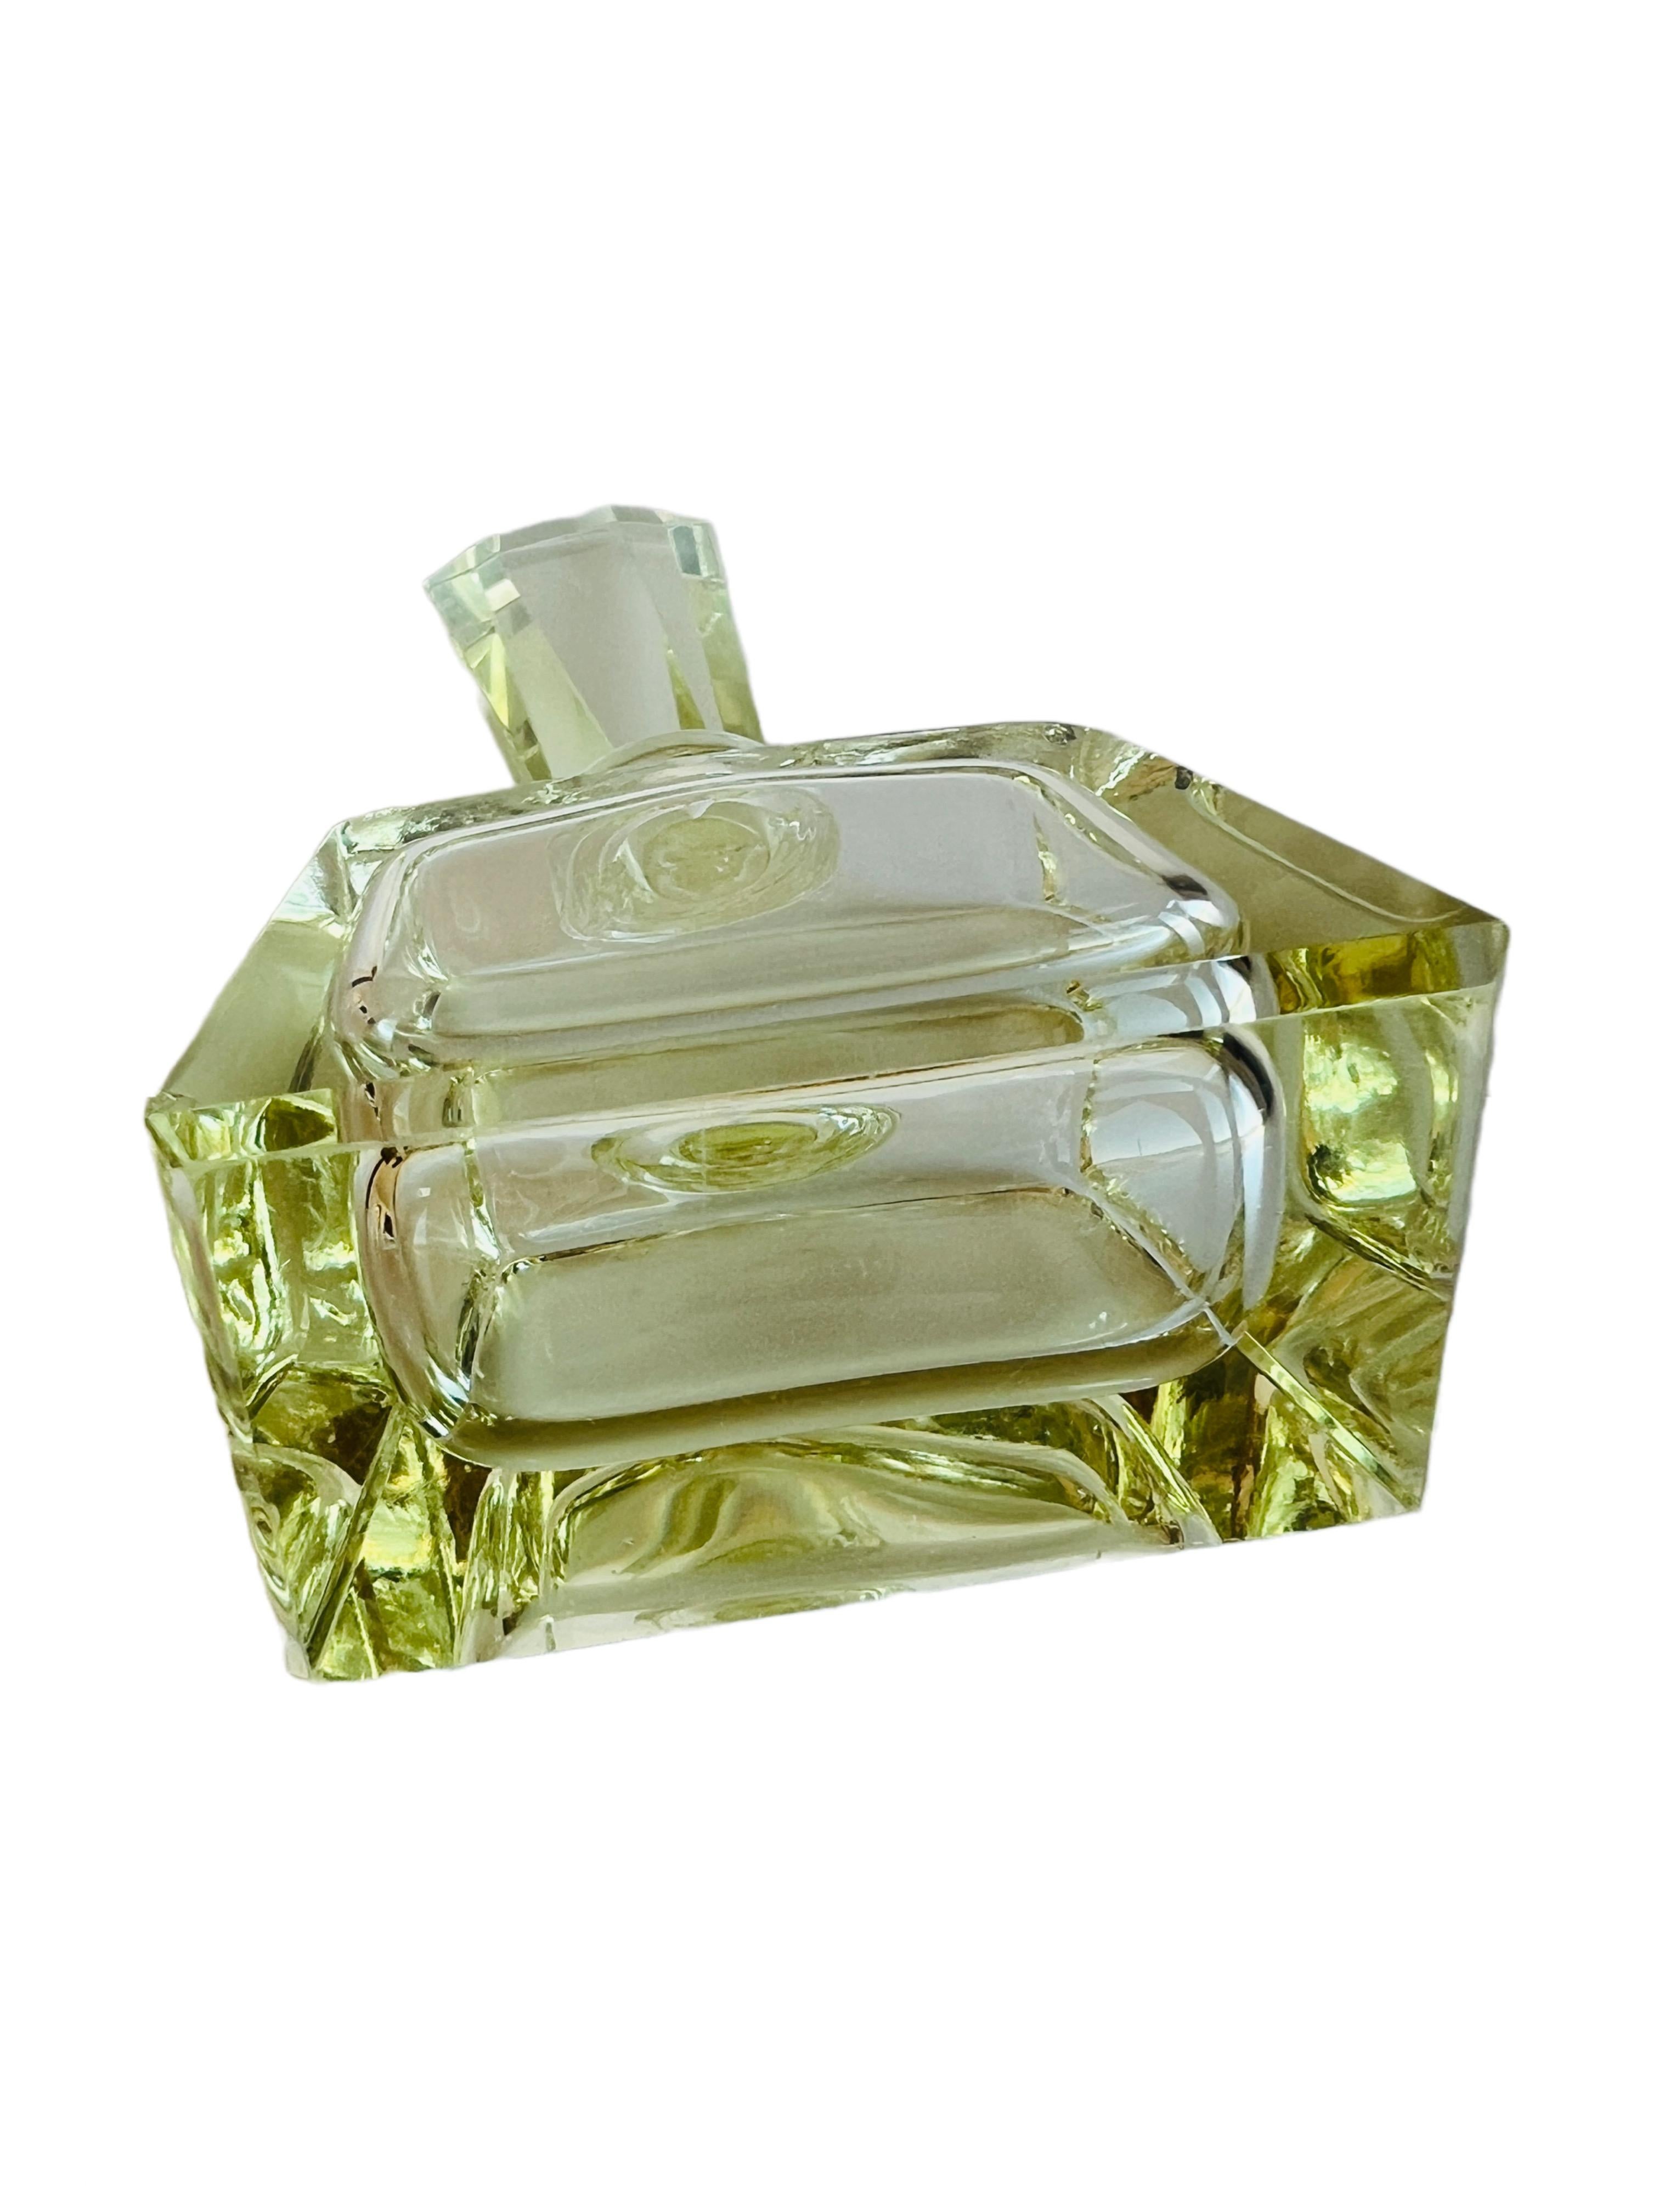 Vintage Light Yellow Crystal Glass Czech Perfume Bottle  In Good Condition For Sale In Sausalito, CA